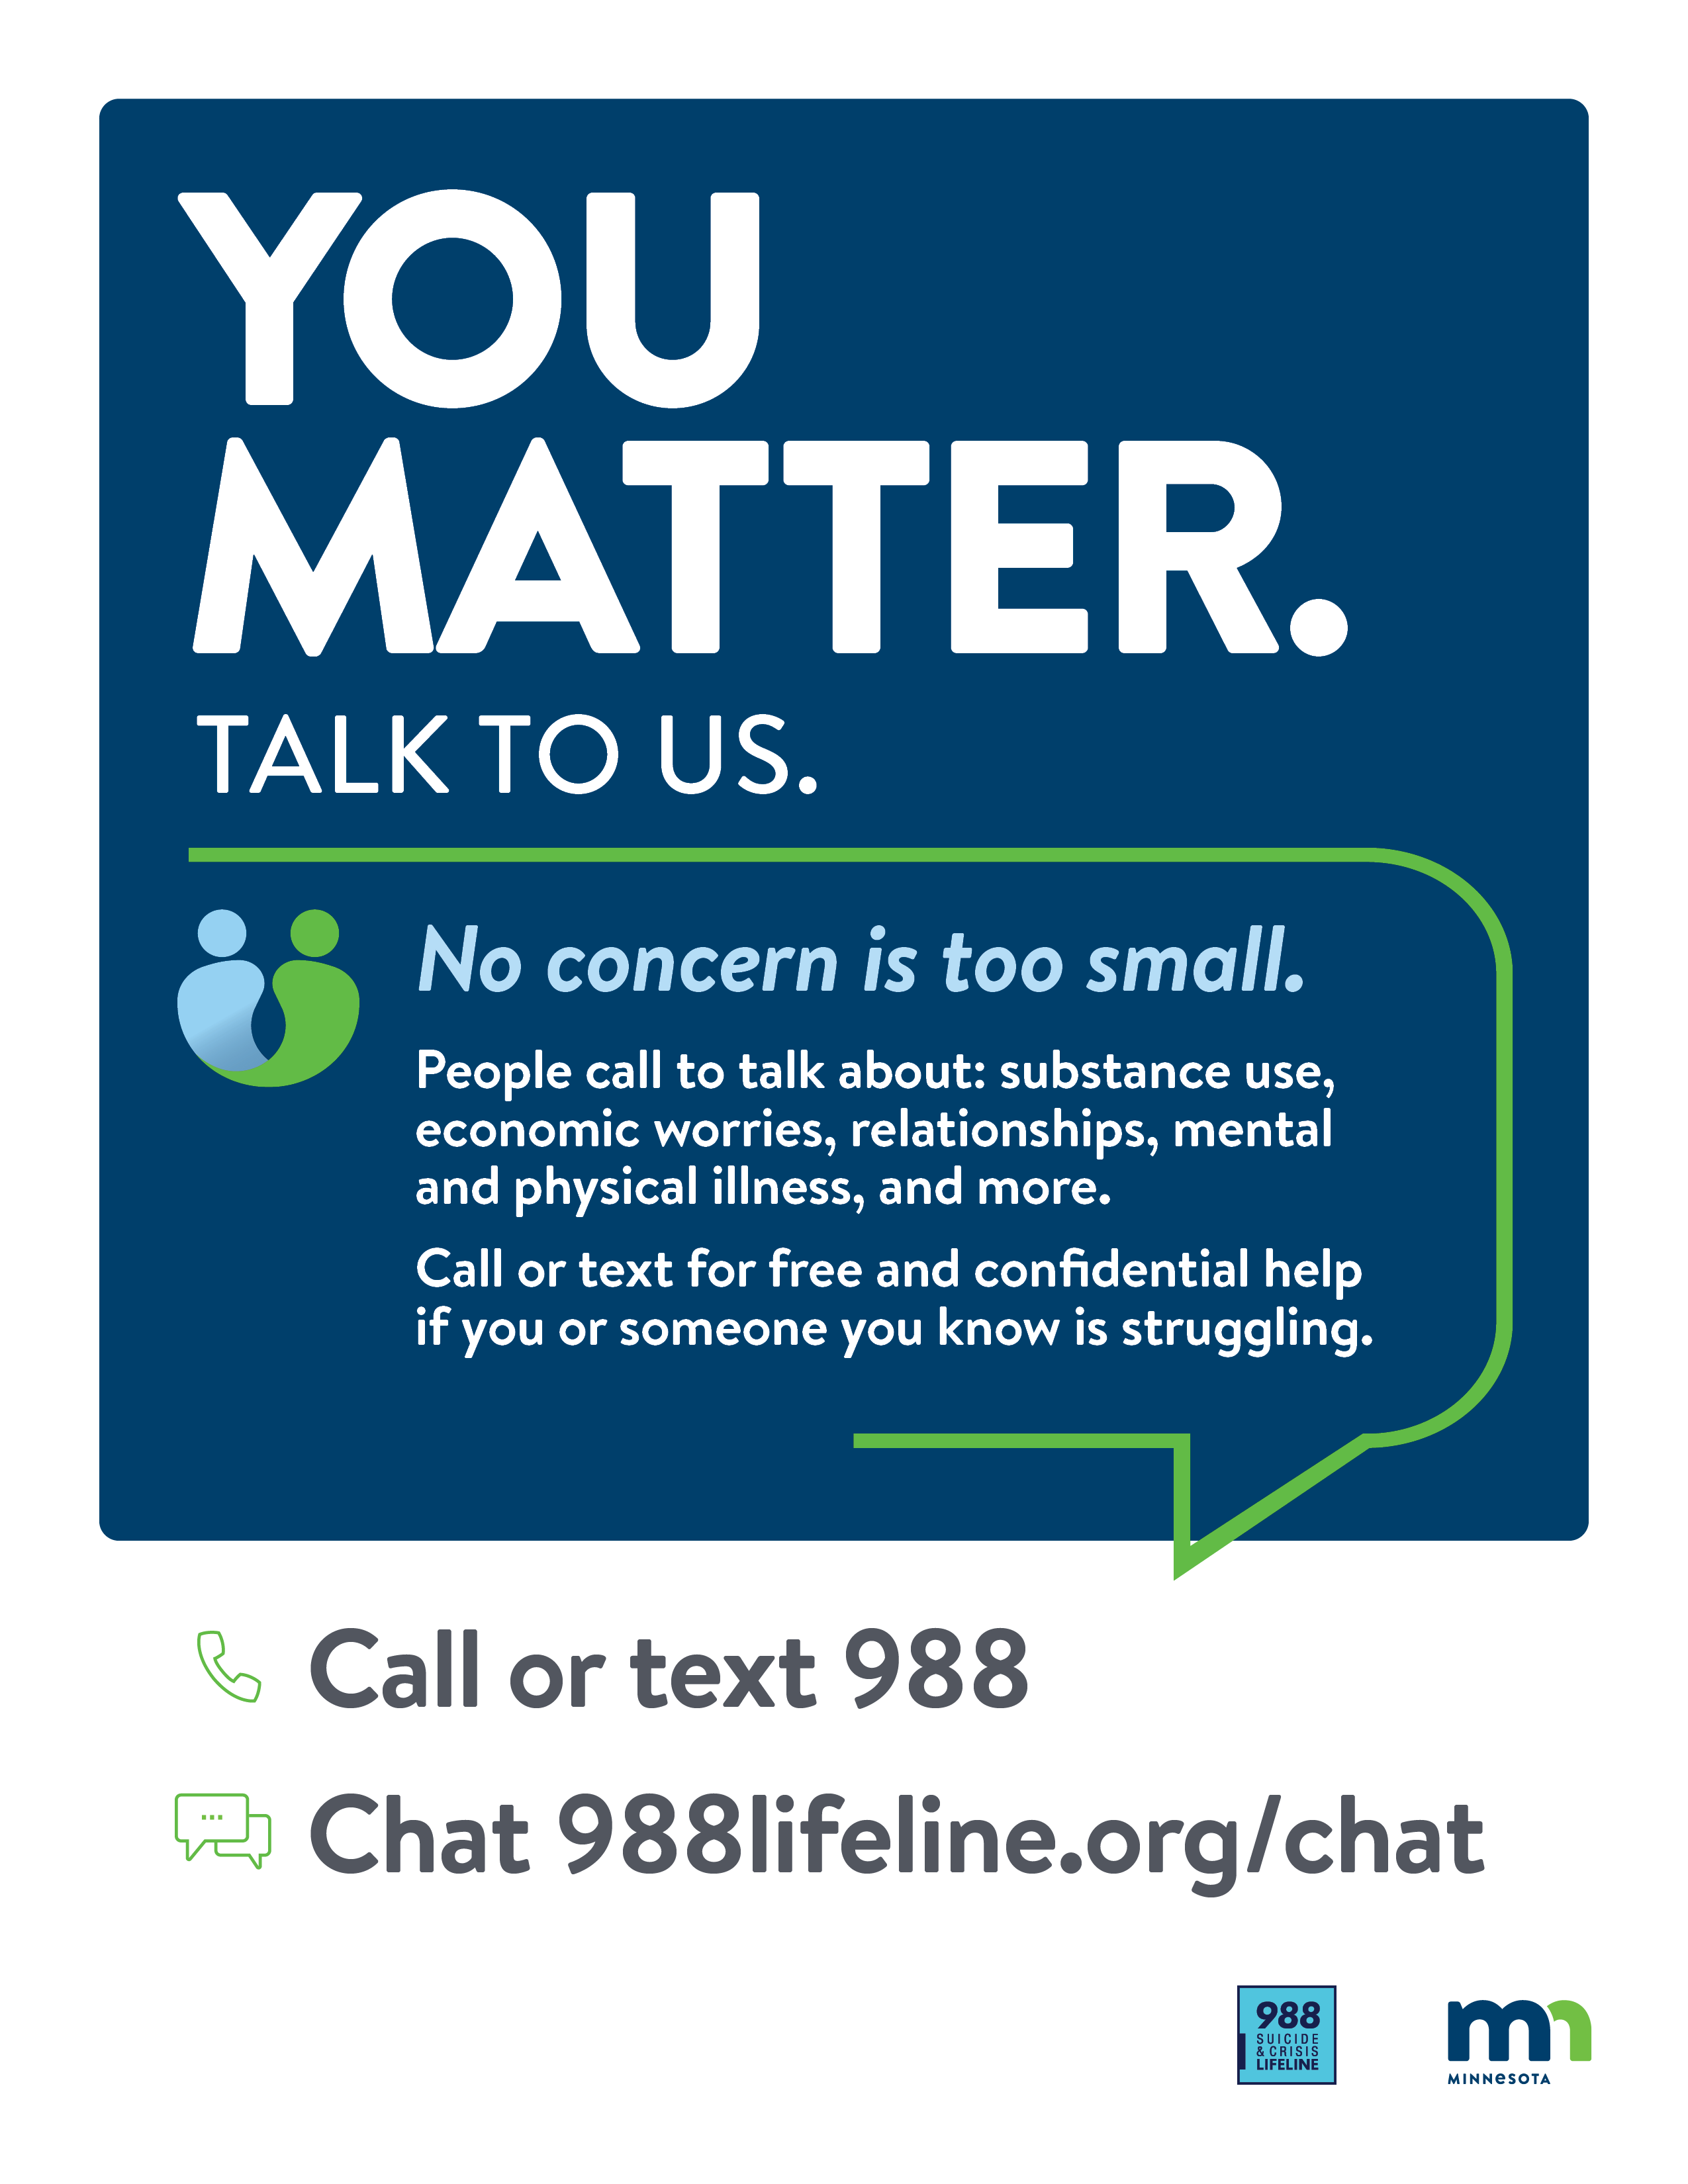 You Matter Mental Health and Suicide Crisis Messaging MN Dept. of